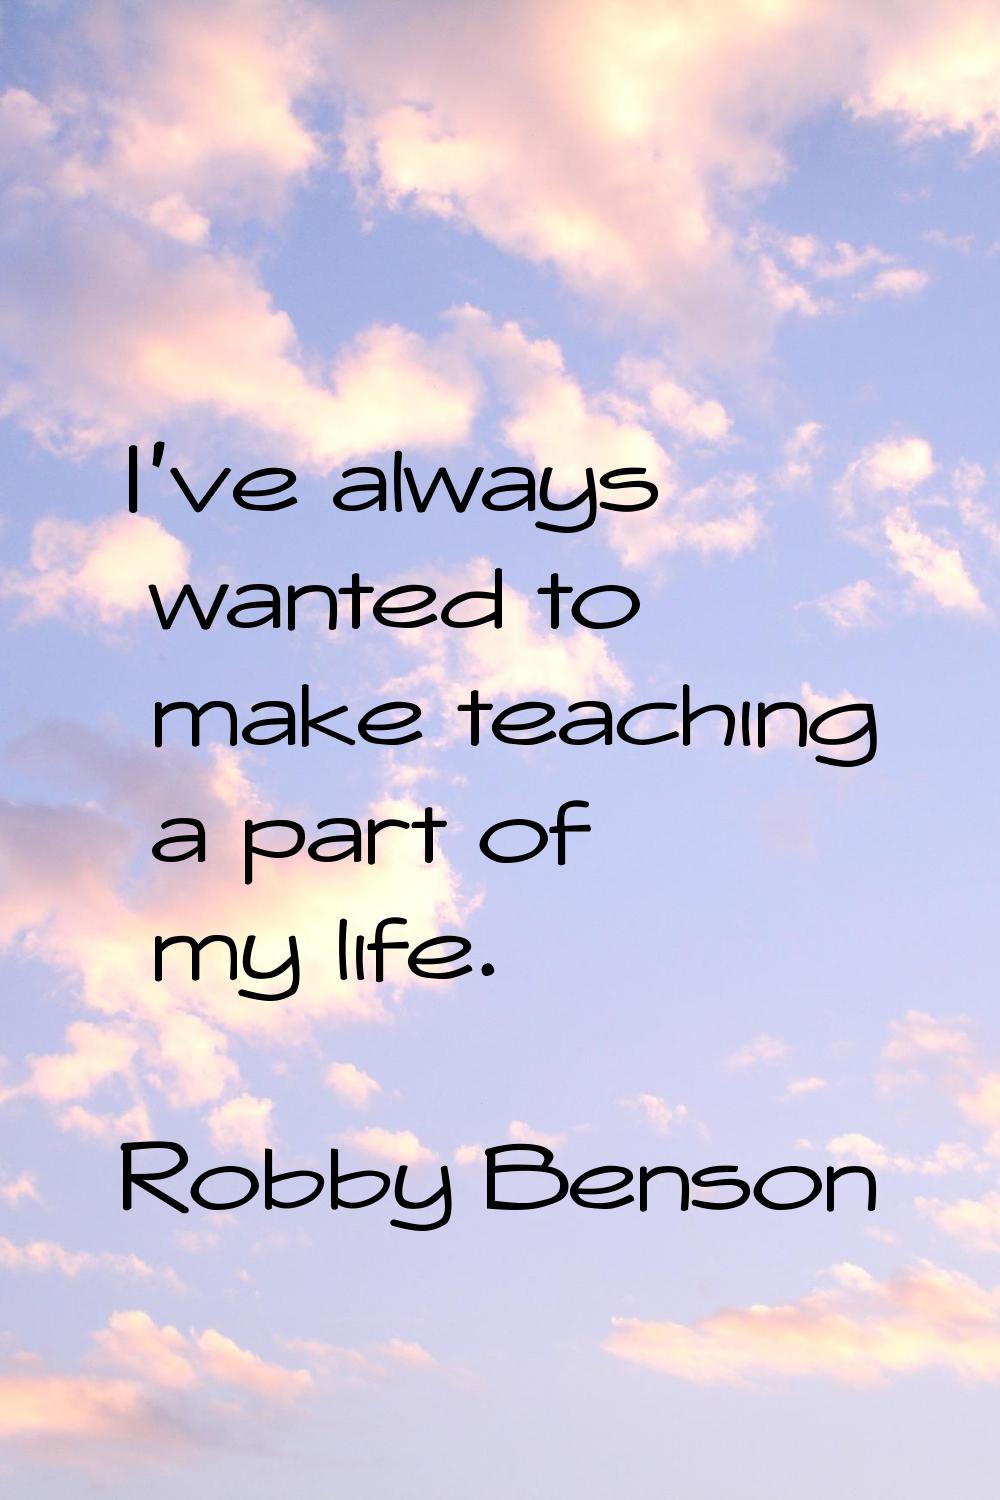 I've always wanted to make teaching a part of my life.